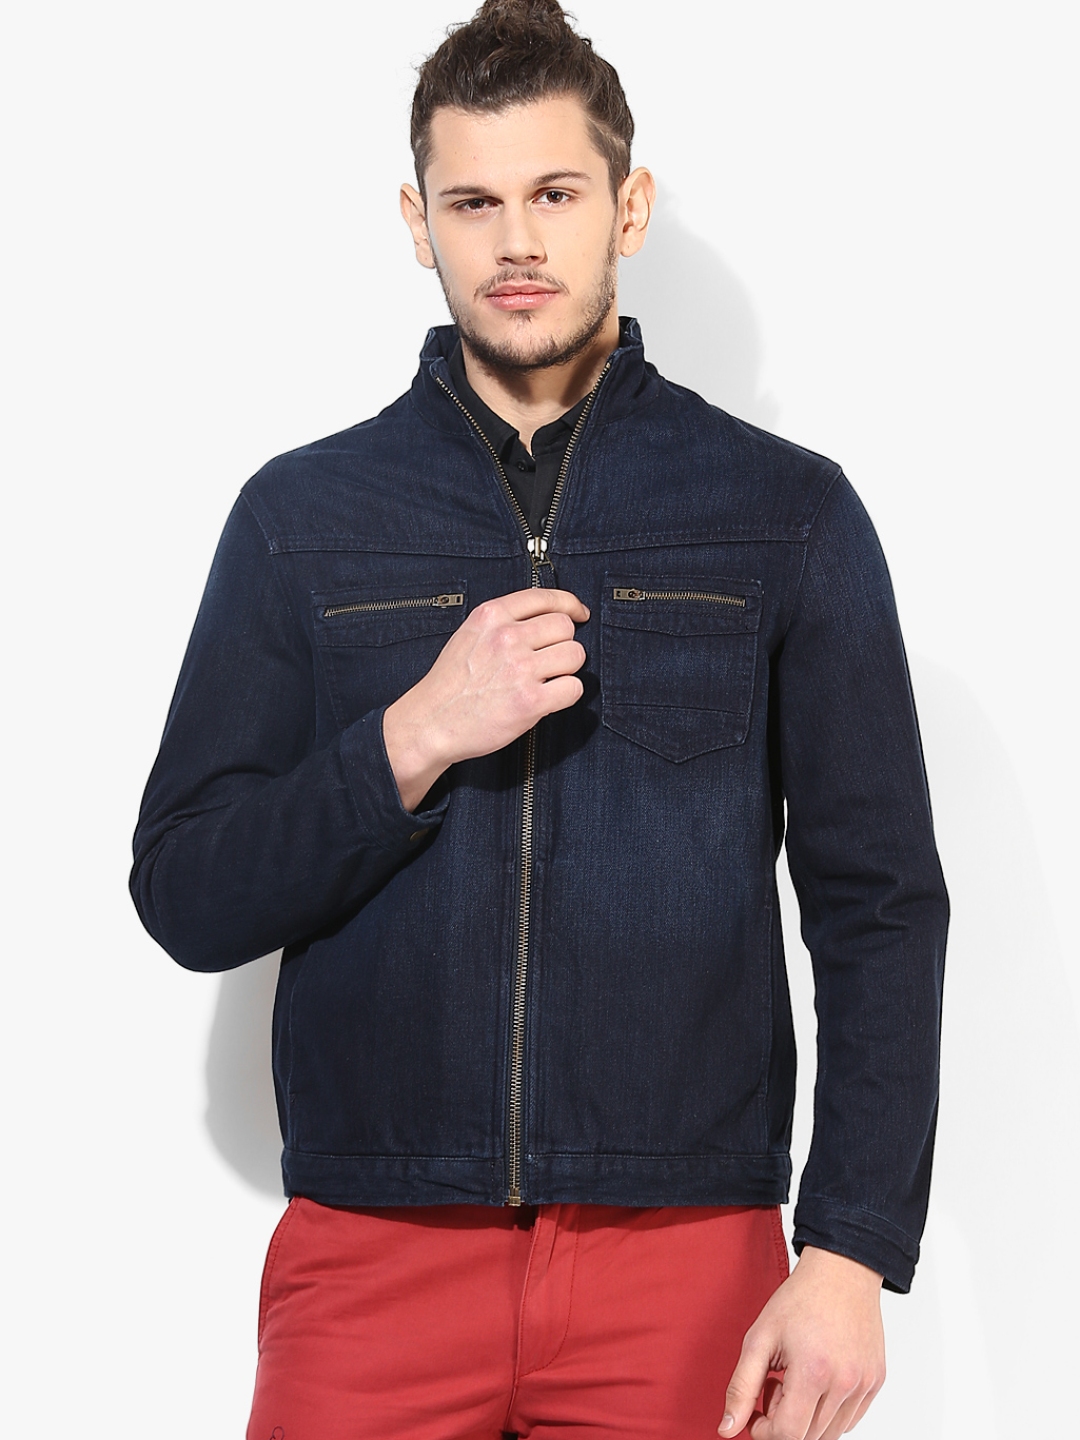 Buy Navy Blue Solid Casual Jacket - Jackets for Men 7677636 | Myntra